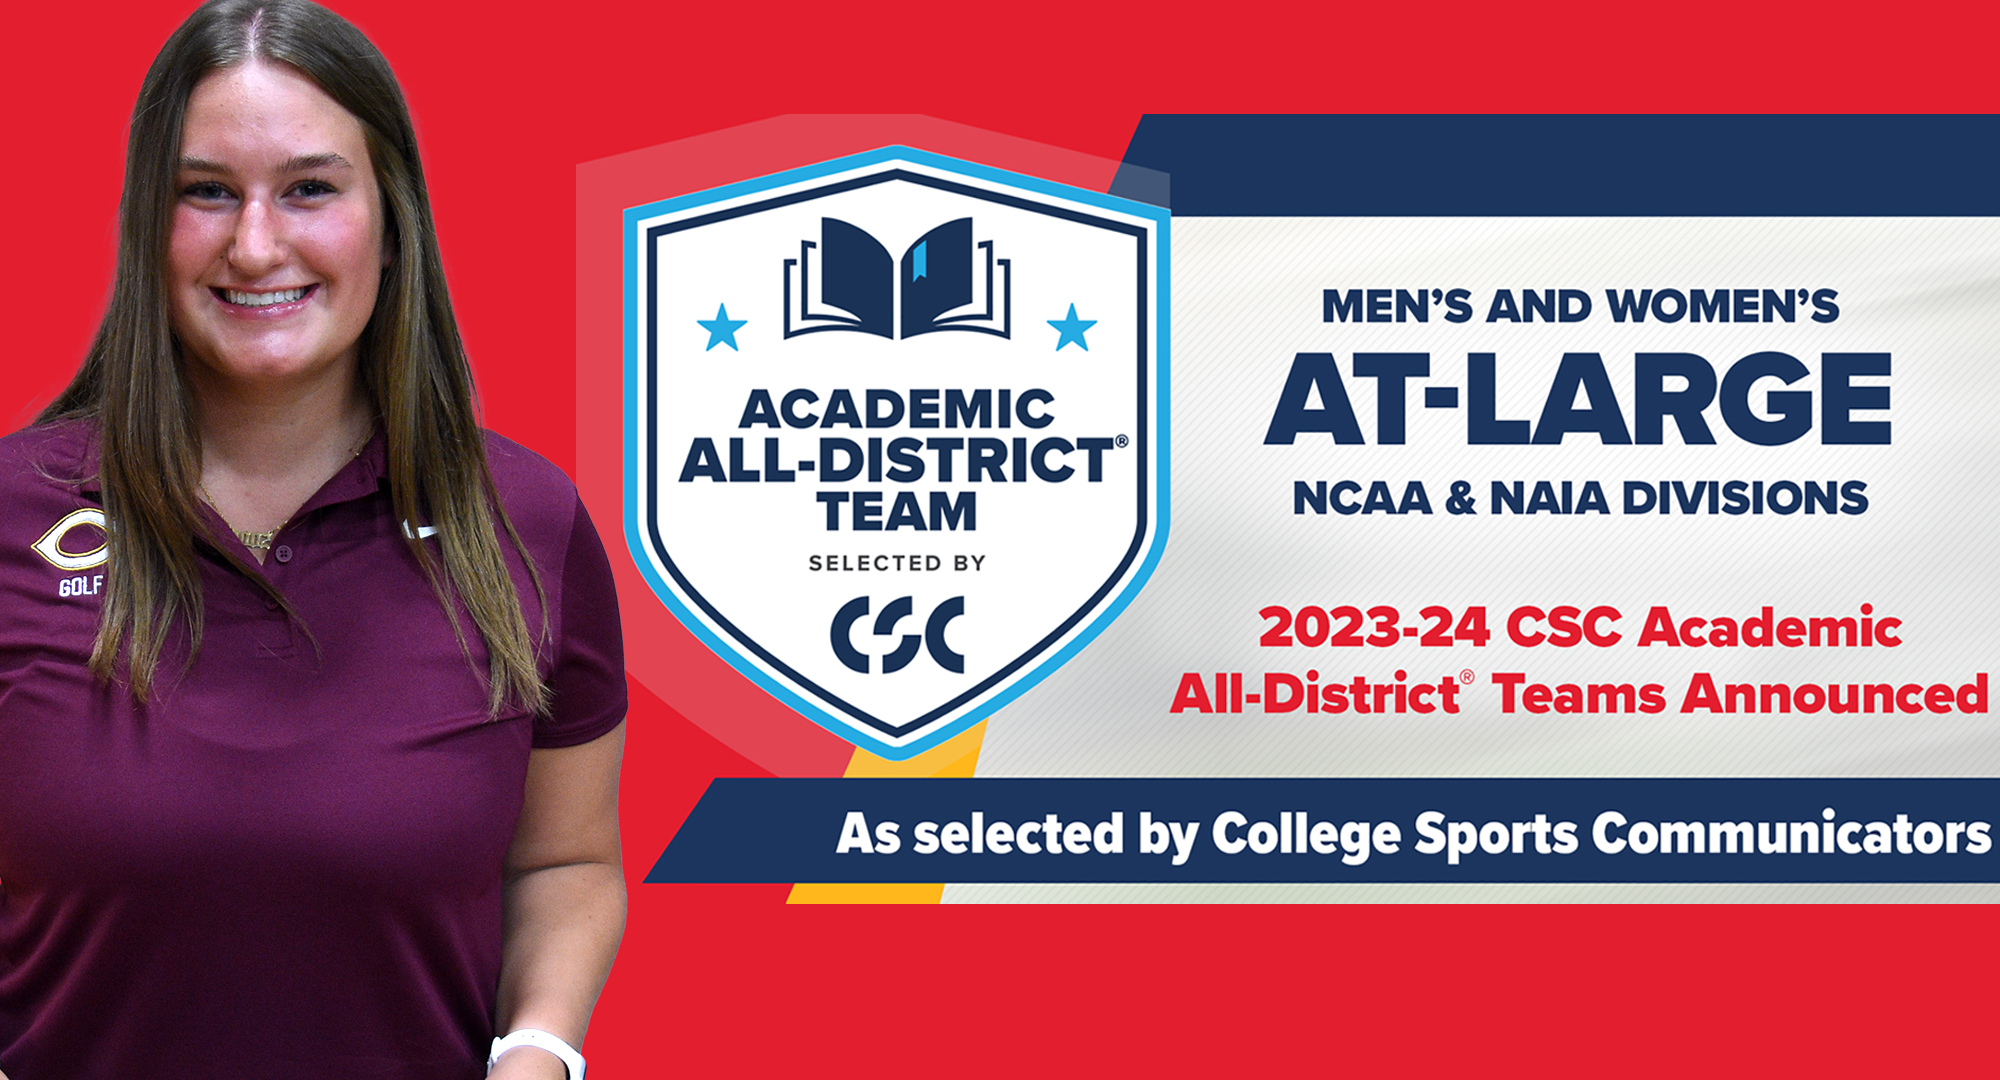 Lillie Kirchner (Sr., South St. Paul, Minn.) was named to the College Sports Communicators (CSC) Academic All-District Women’s At-Large Team. 